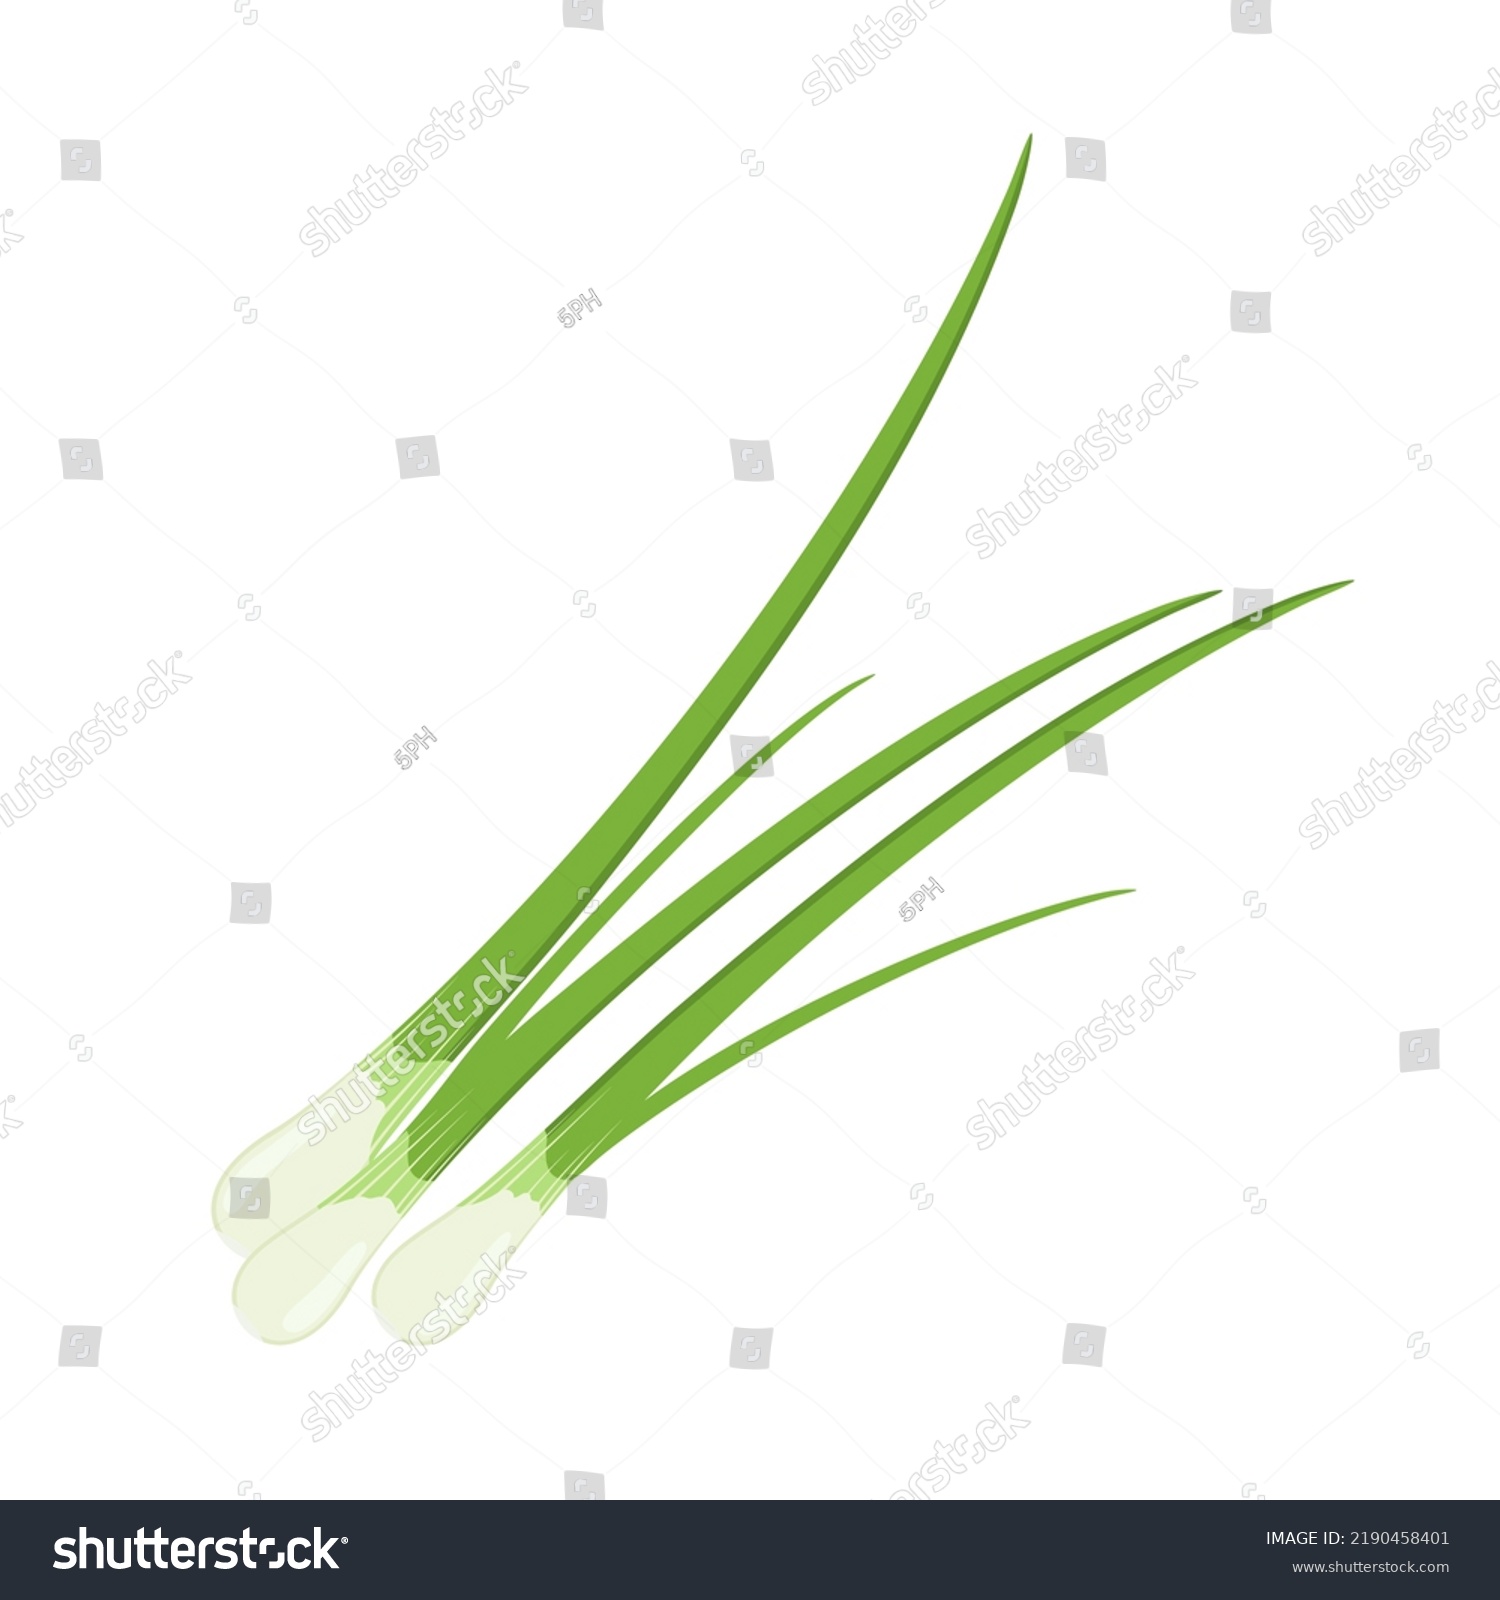 SVG of Green onion, chives or scallion, vector illustration isolated on white background svg